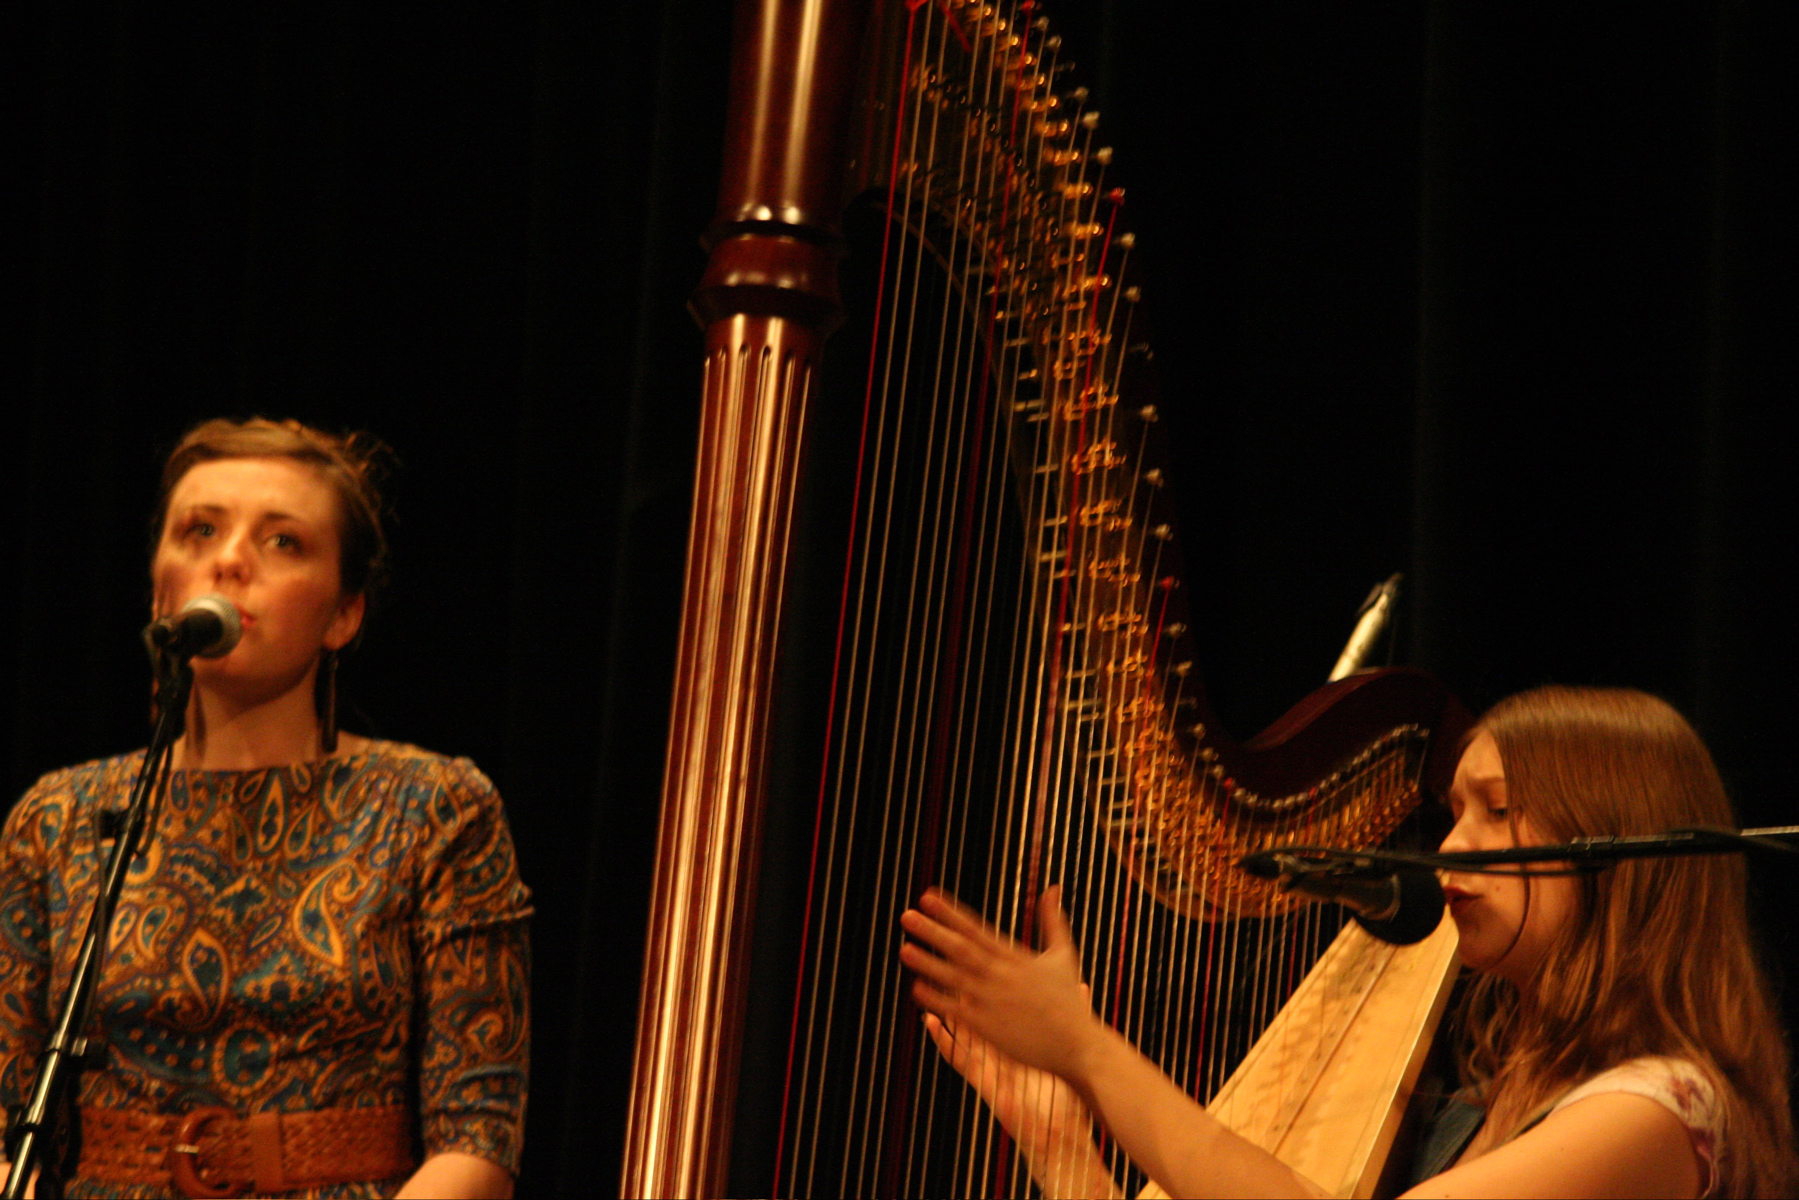 two women with microphones singing and playing a harp